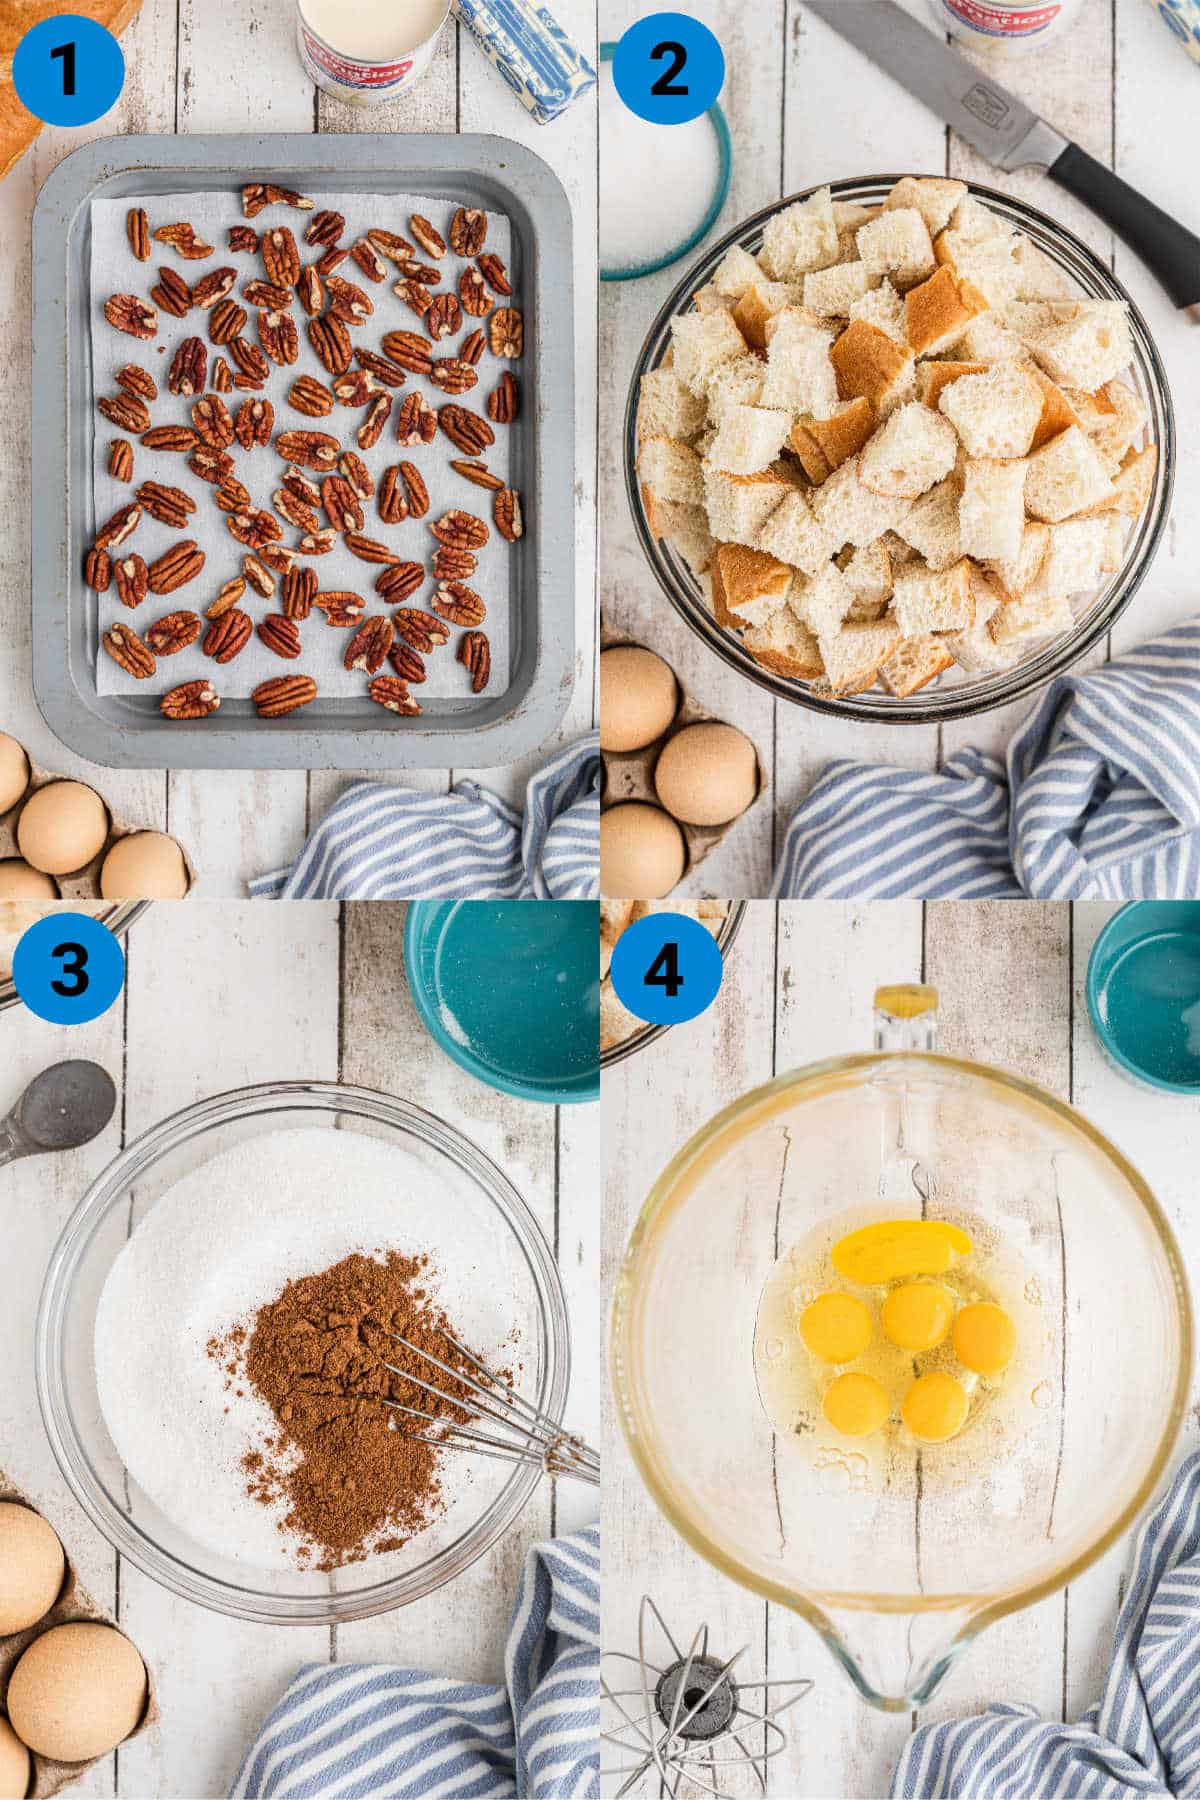 A collage of four images showing how to make bread pudding, recipe steps 1 through 4.